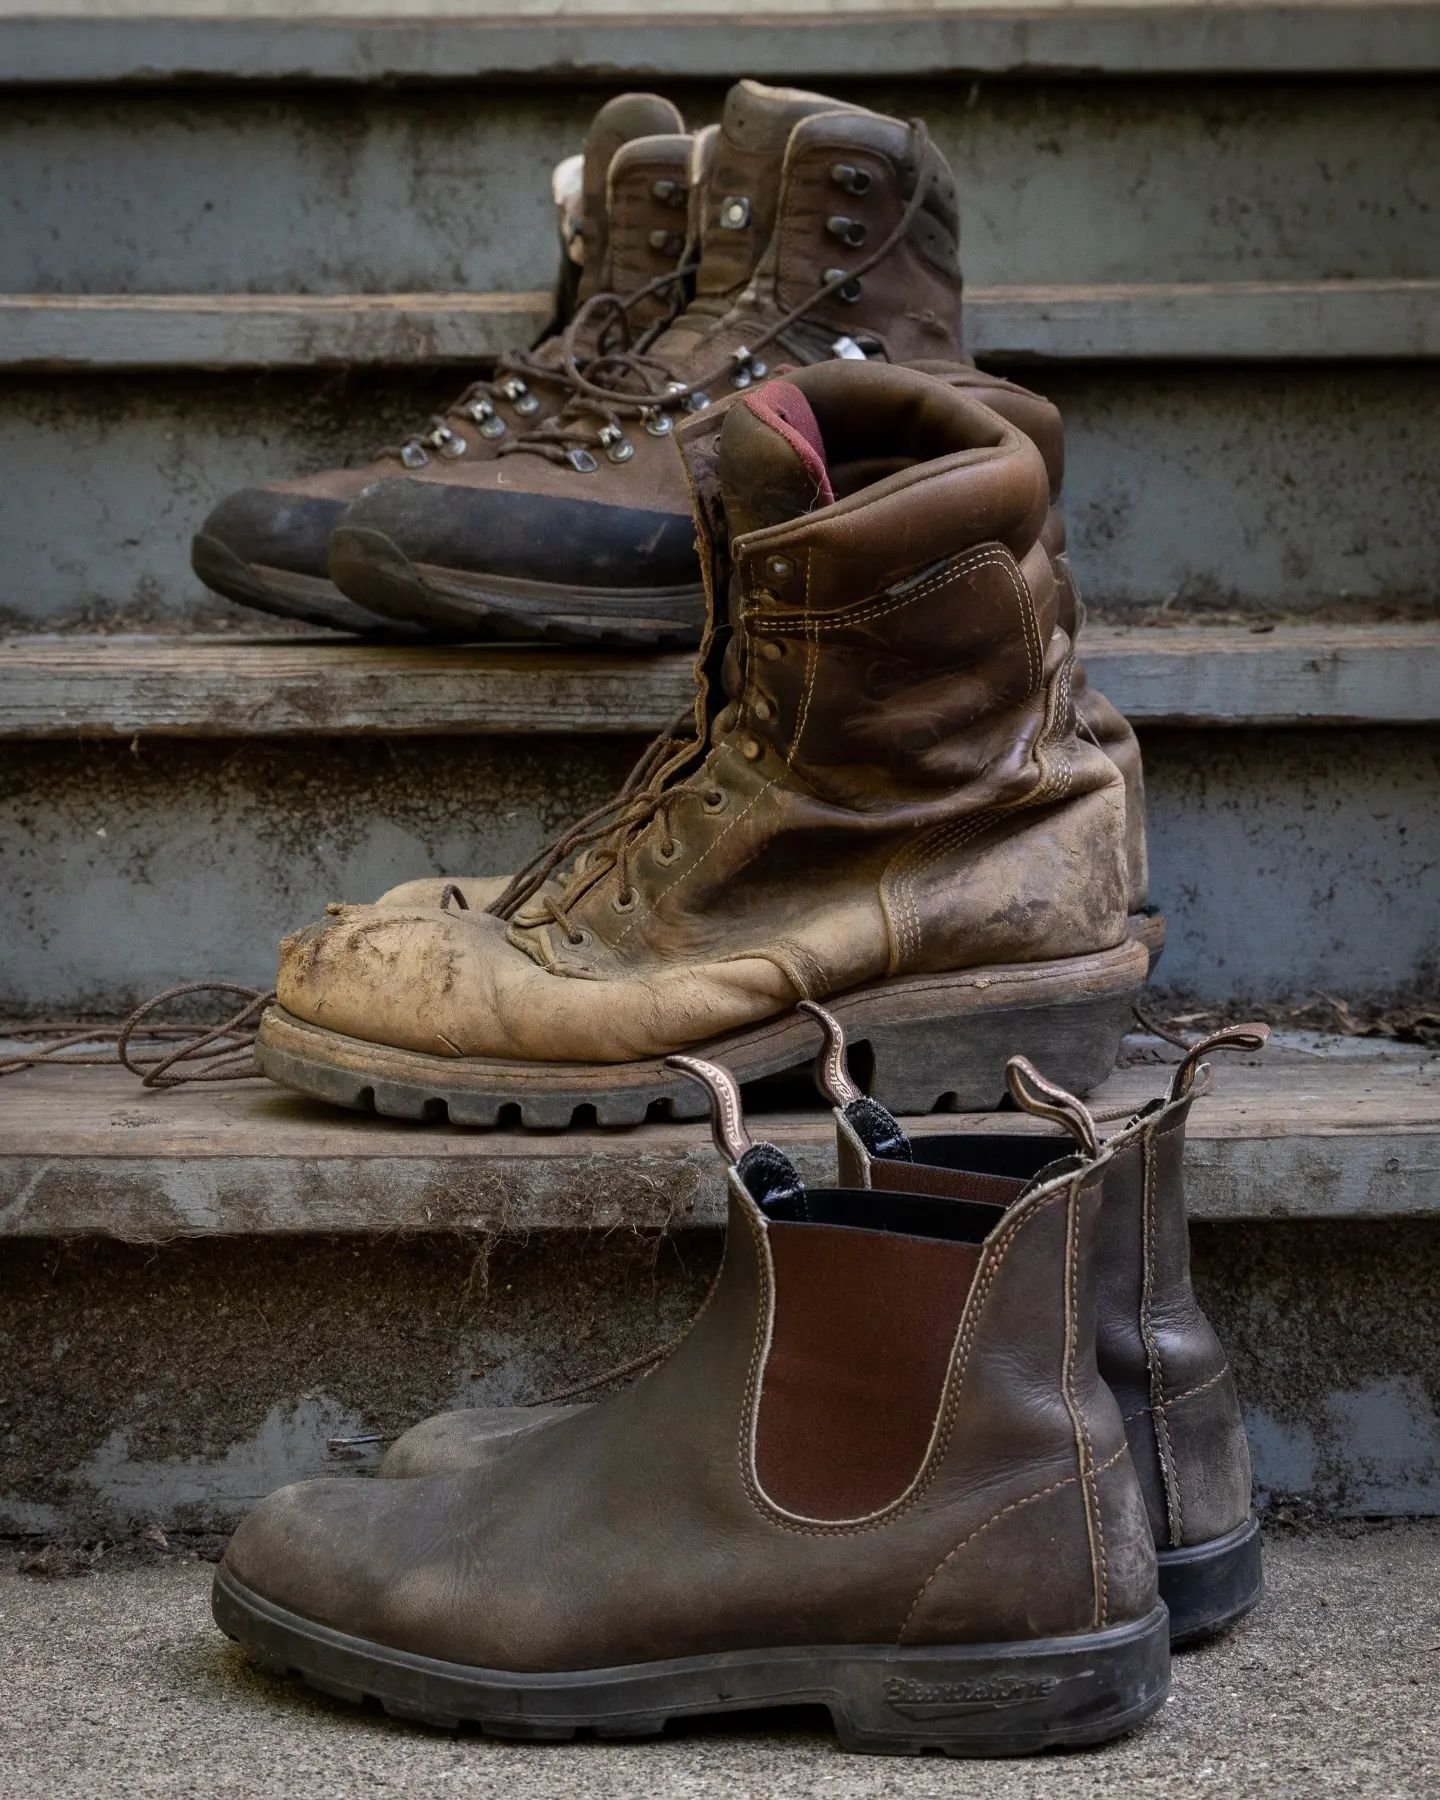 Let's talk boots! Seasonal trail workers nationwide are gearing up for a new season, oiling up boots and maybe buying new ones. 

What are your favorite boots for trail work? Do you wear logger boots? Steel toes? Approach shoes? Fire boots? Rubberize